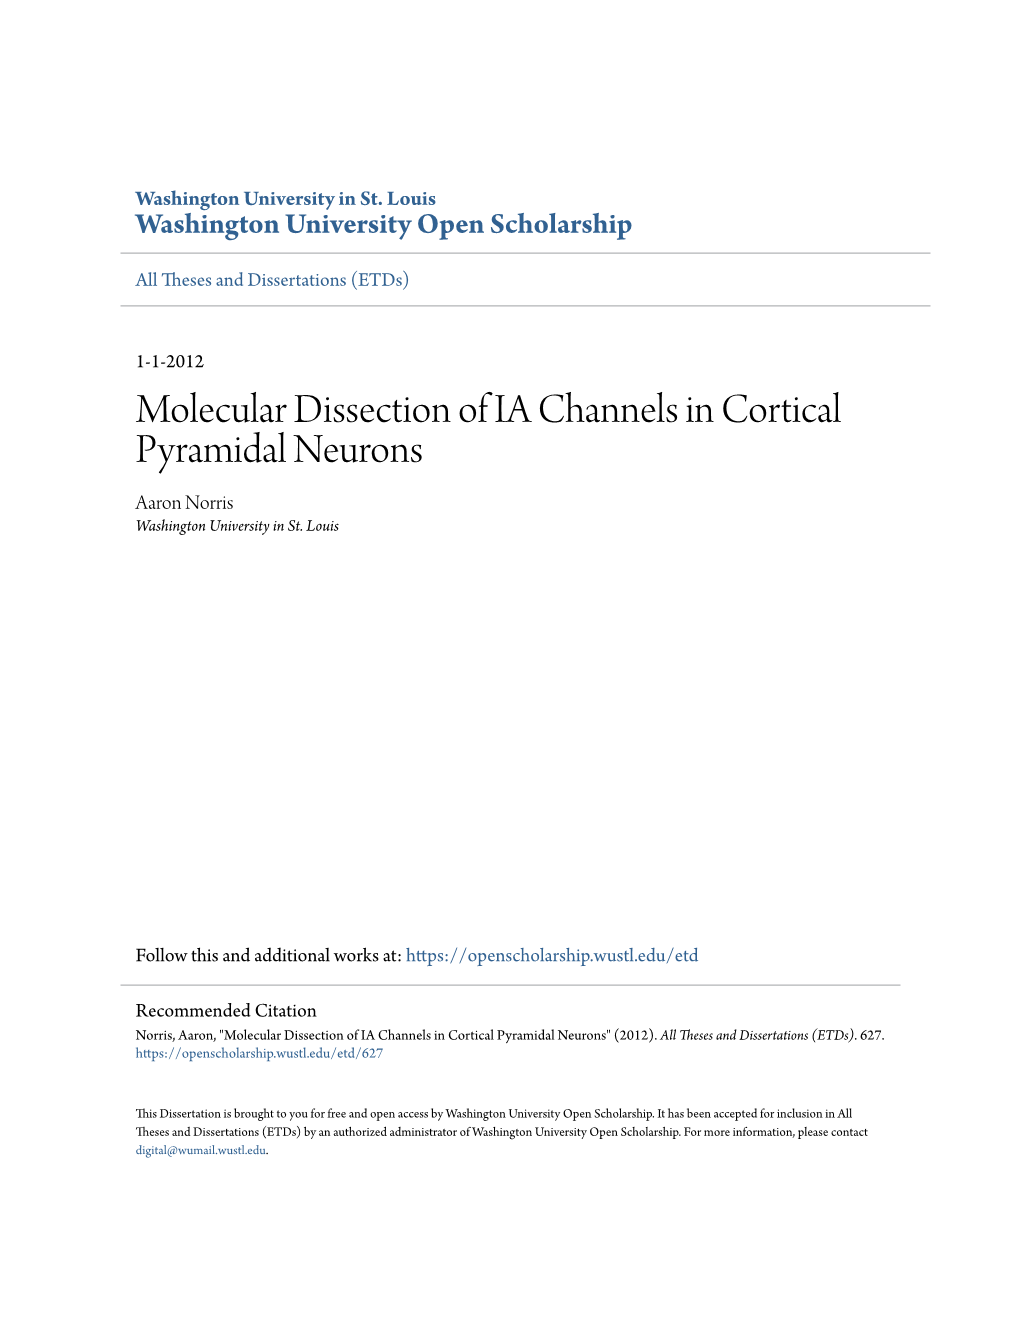 Molecular Dissection of IA Channels in Cortical Pyramidal Neurons Aaron Norris Washington University in St